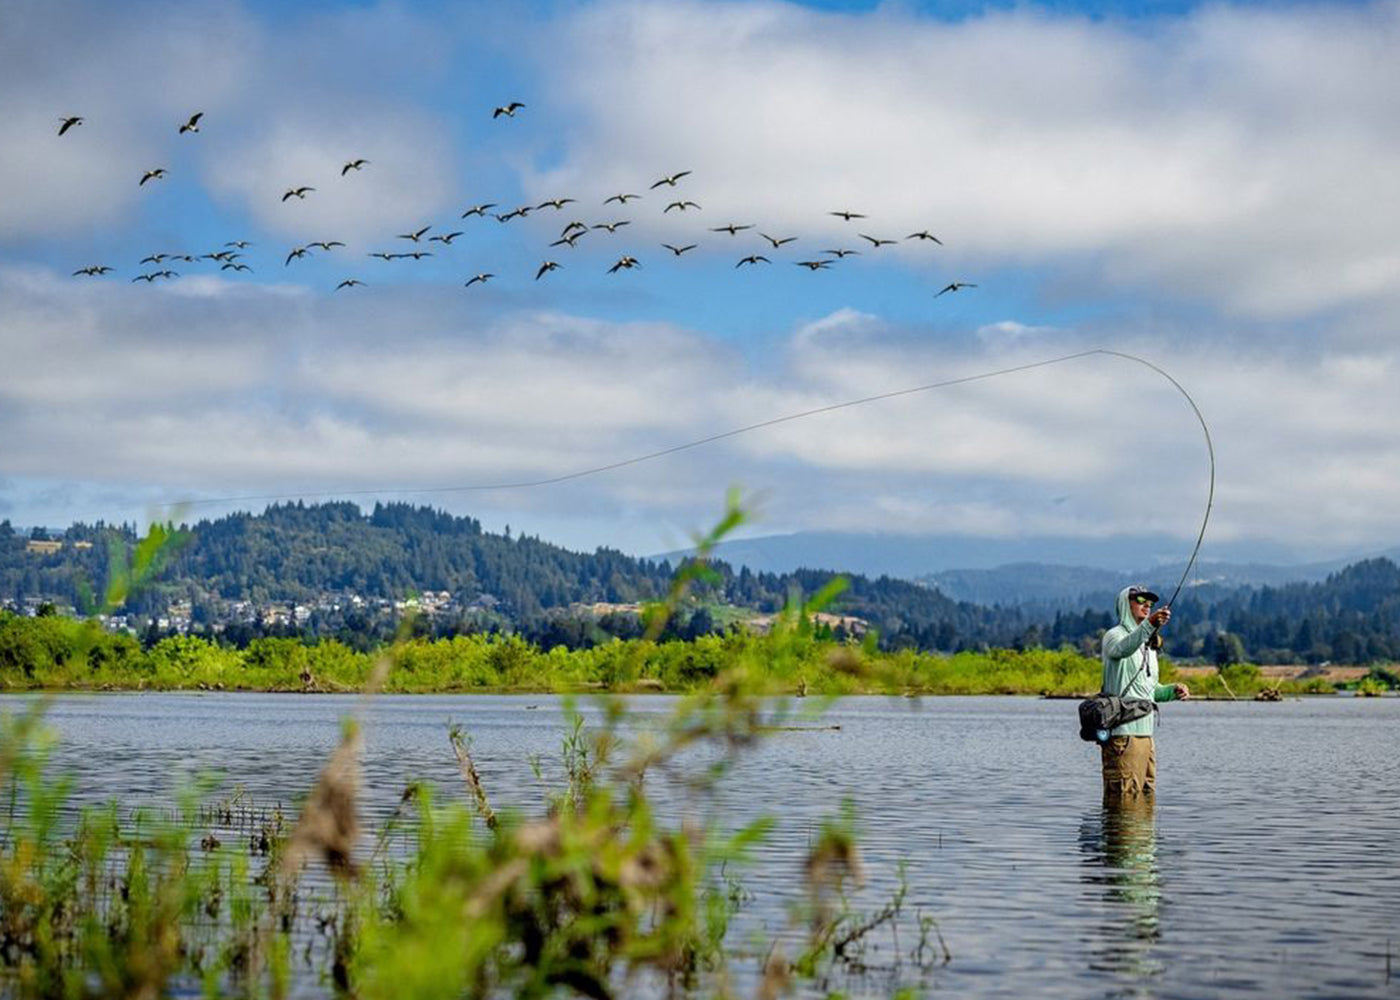 Fly fisherman using high-quality fishing gear while casting a line in a serene lake, with a flock of birds flying overhead. Scenic outdoor fishing experience with beautiful landscape views.